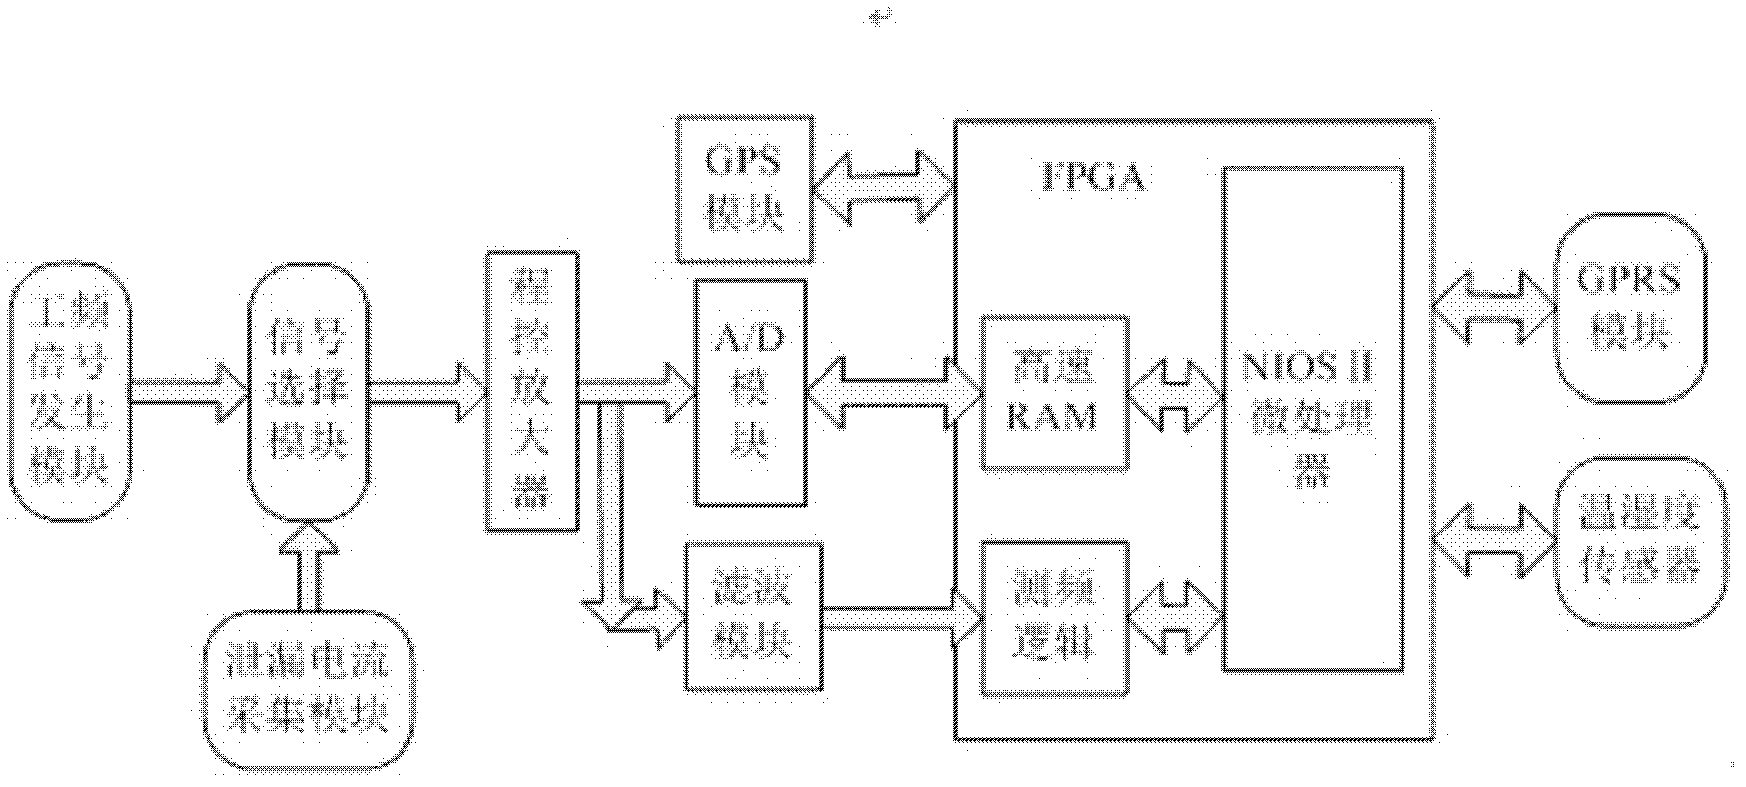 Capacitive equipment insulation state real-time on-line monitoring method